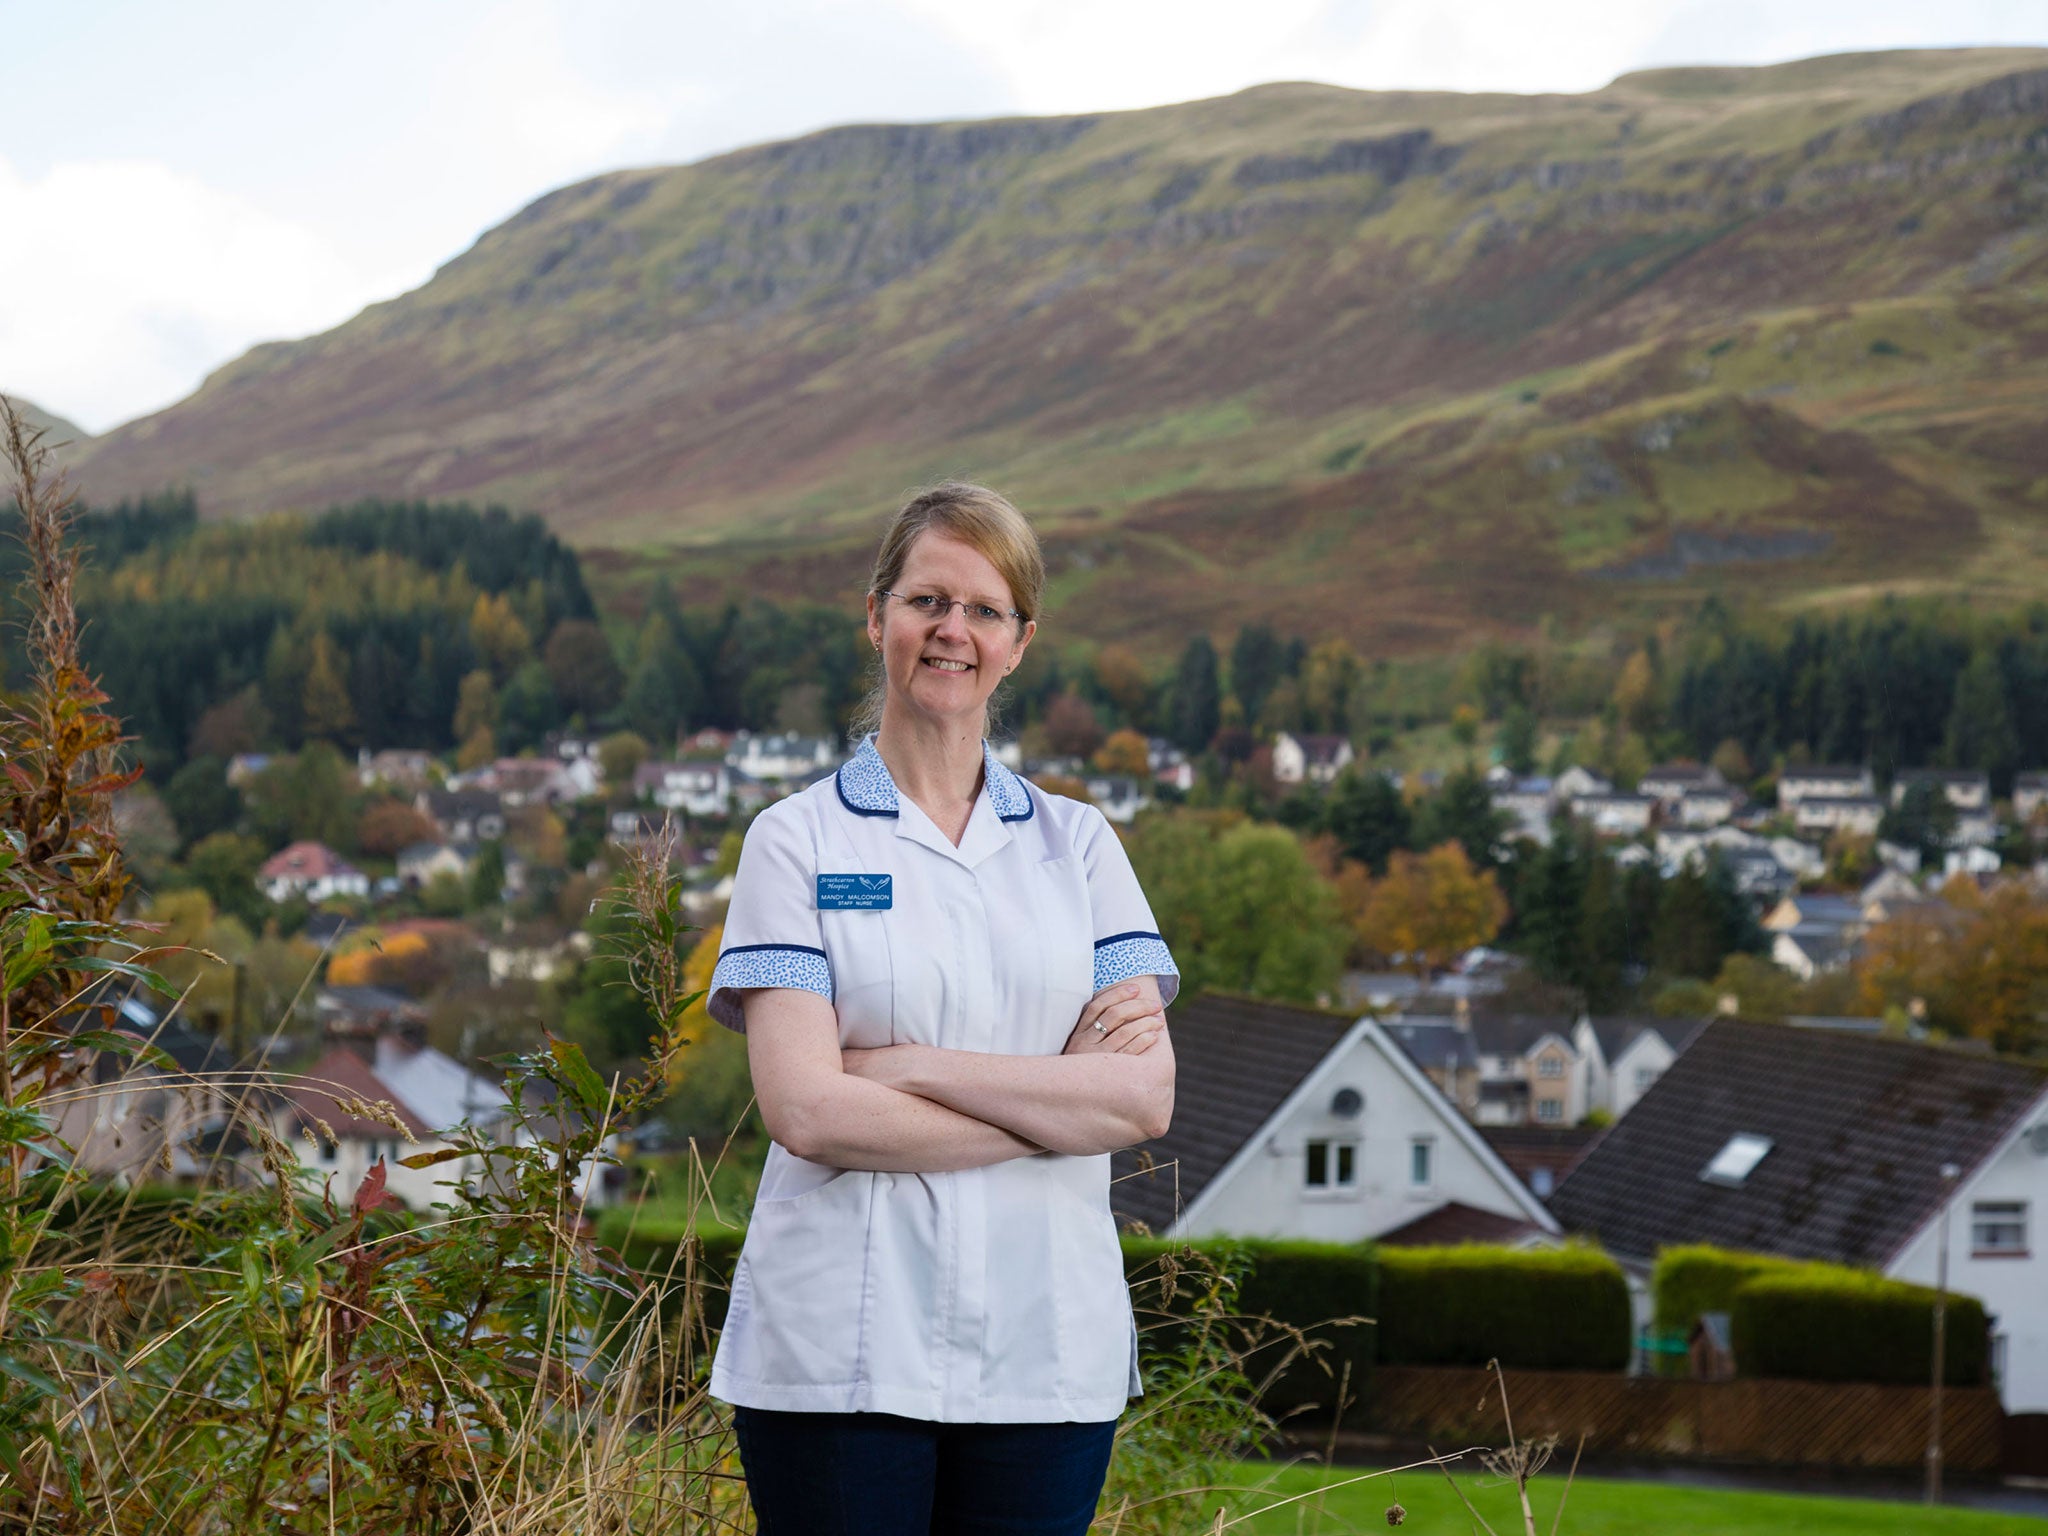 ‘Finding that spark’: Nurse Malcomson, who works at the Strathcarron hospice in Scotland